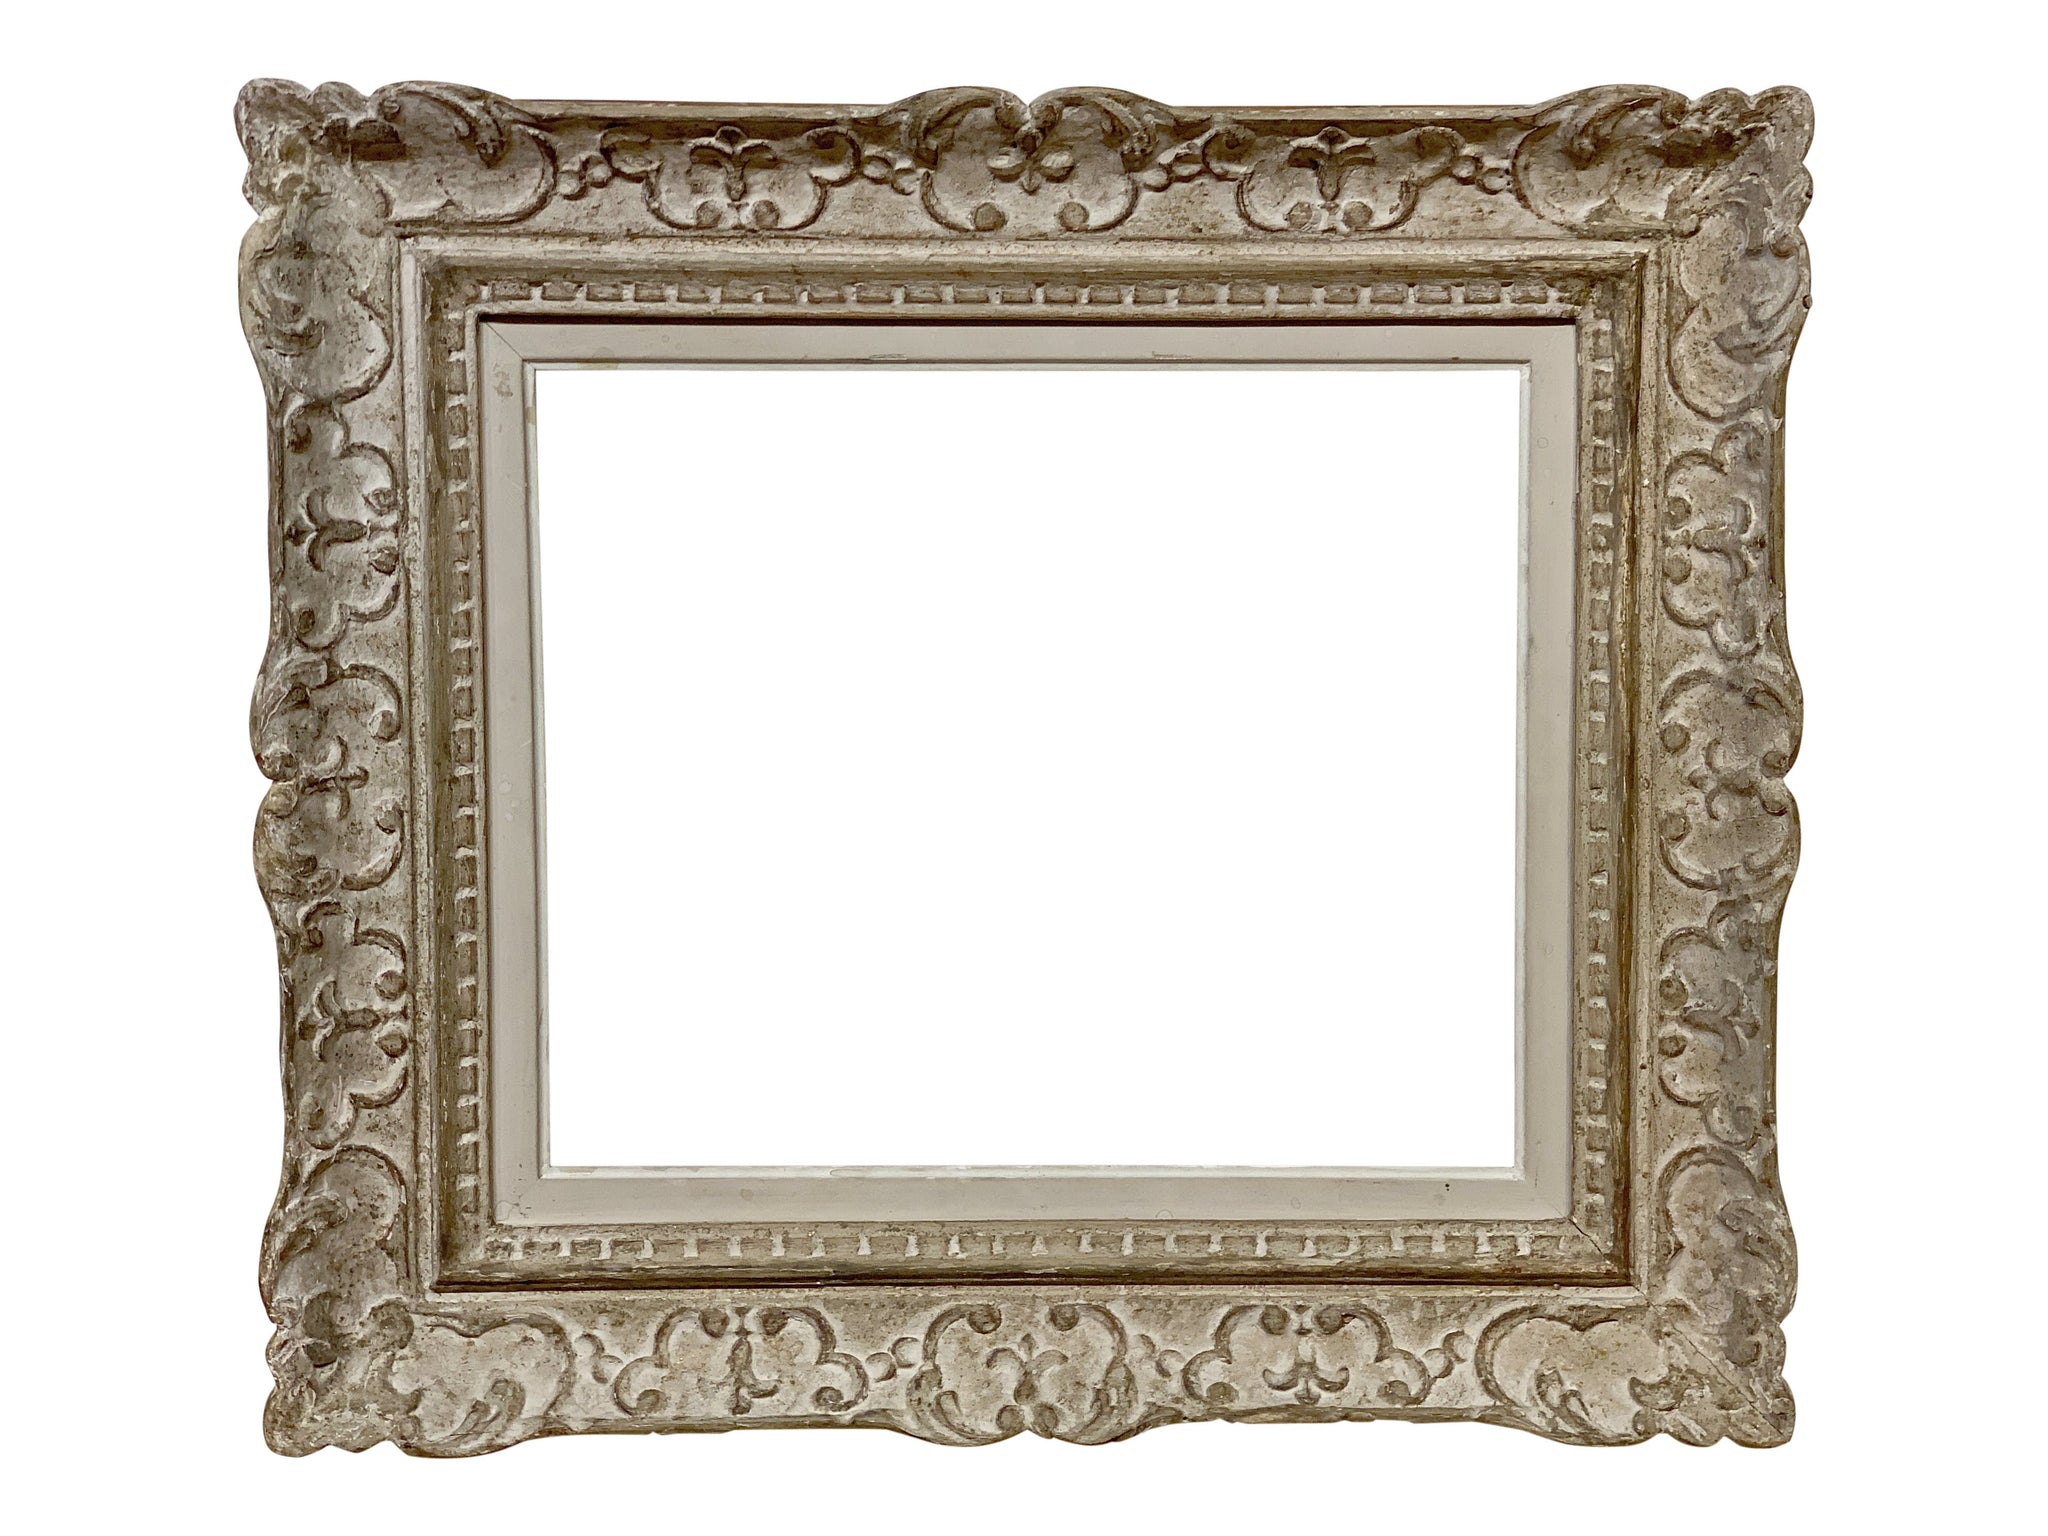 15x18 Inch Vintage White Shabby Chic Picture Frame for canvas art circa 1900s (20th Century).